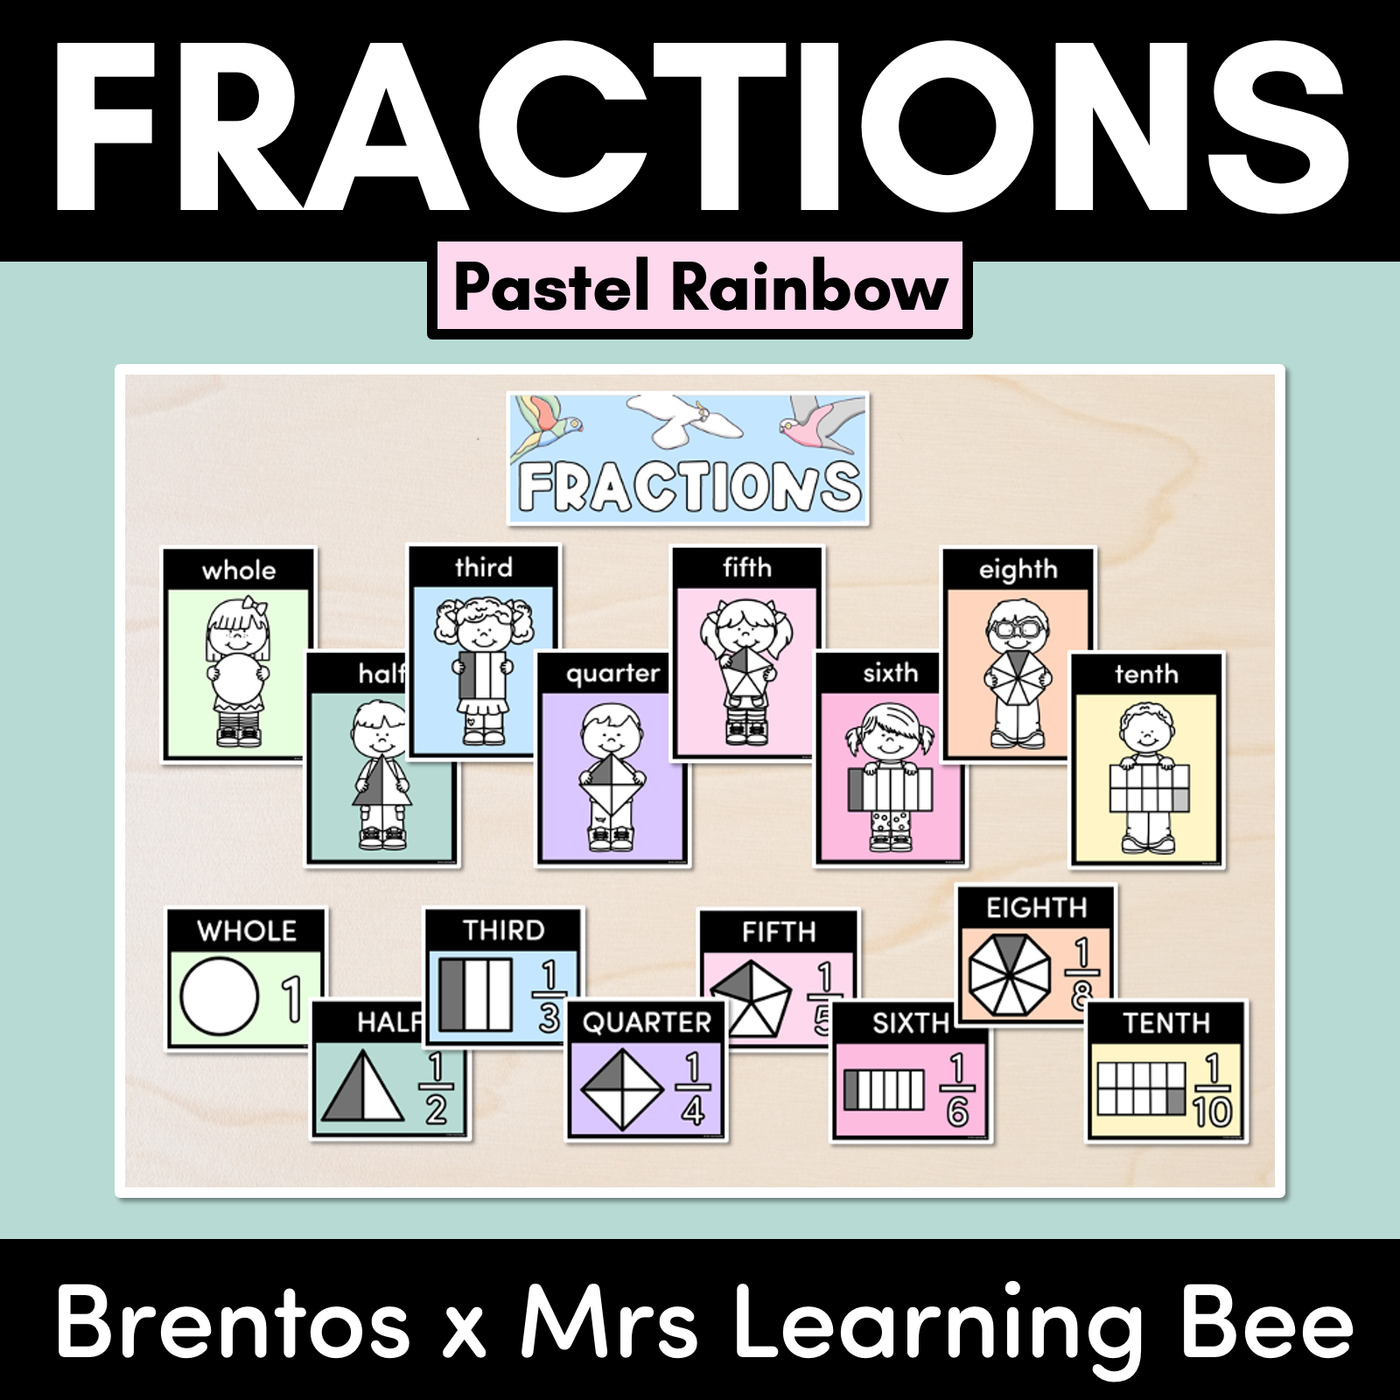 FRACTIONS POSTERS - The Brentos Collection - Pastel Rainbow